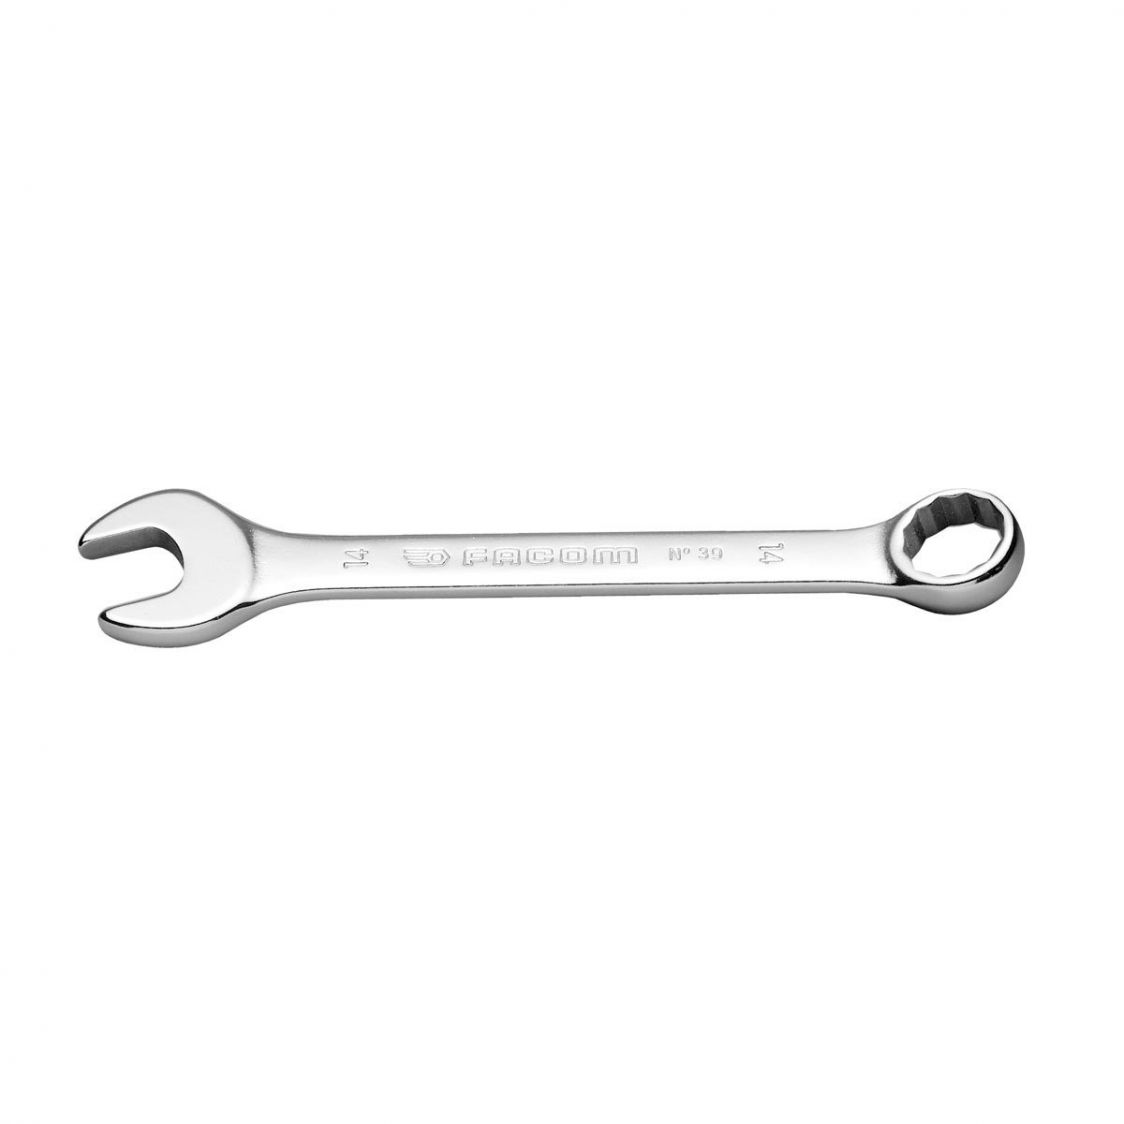 FACOM 39.7 - 7mm Metric Stubby Combination Spanner